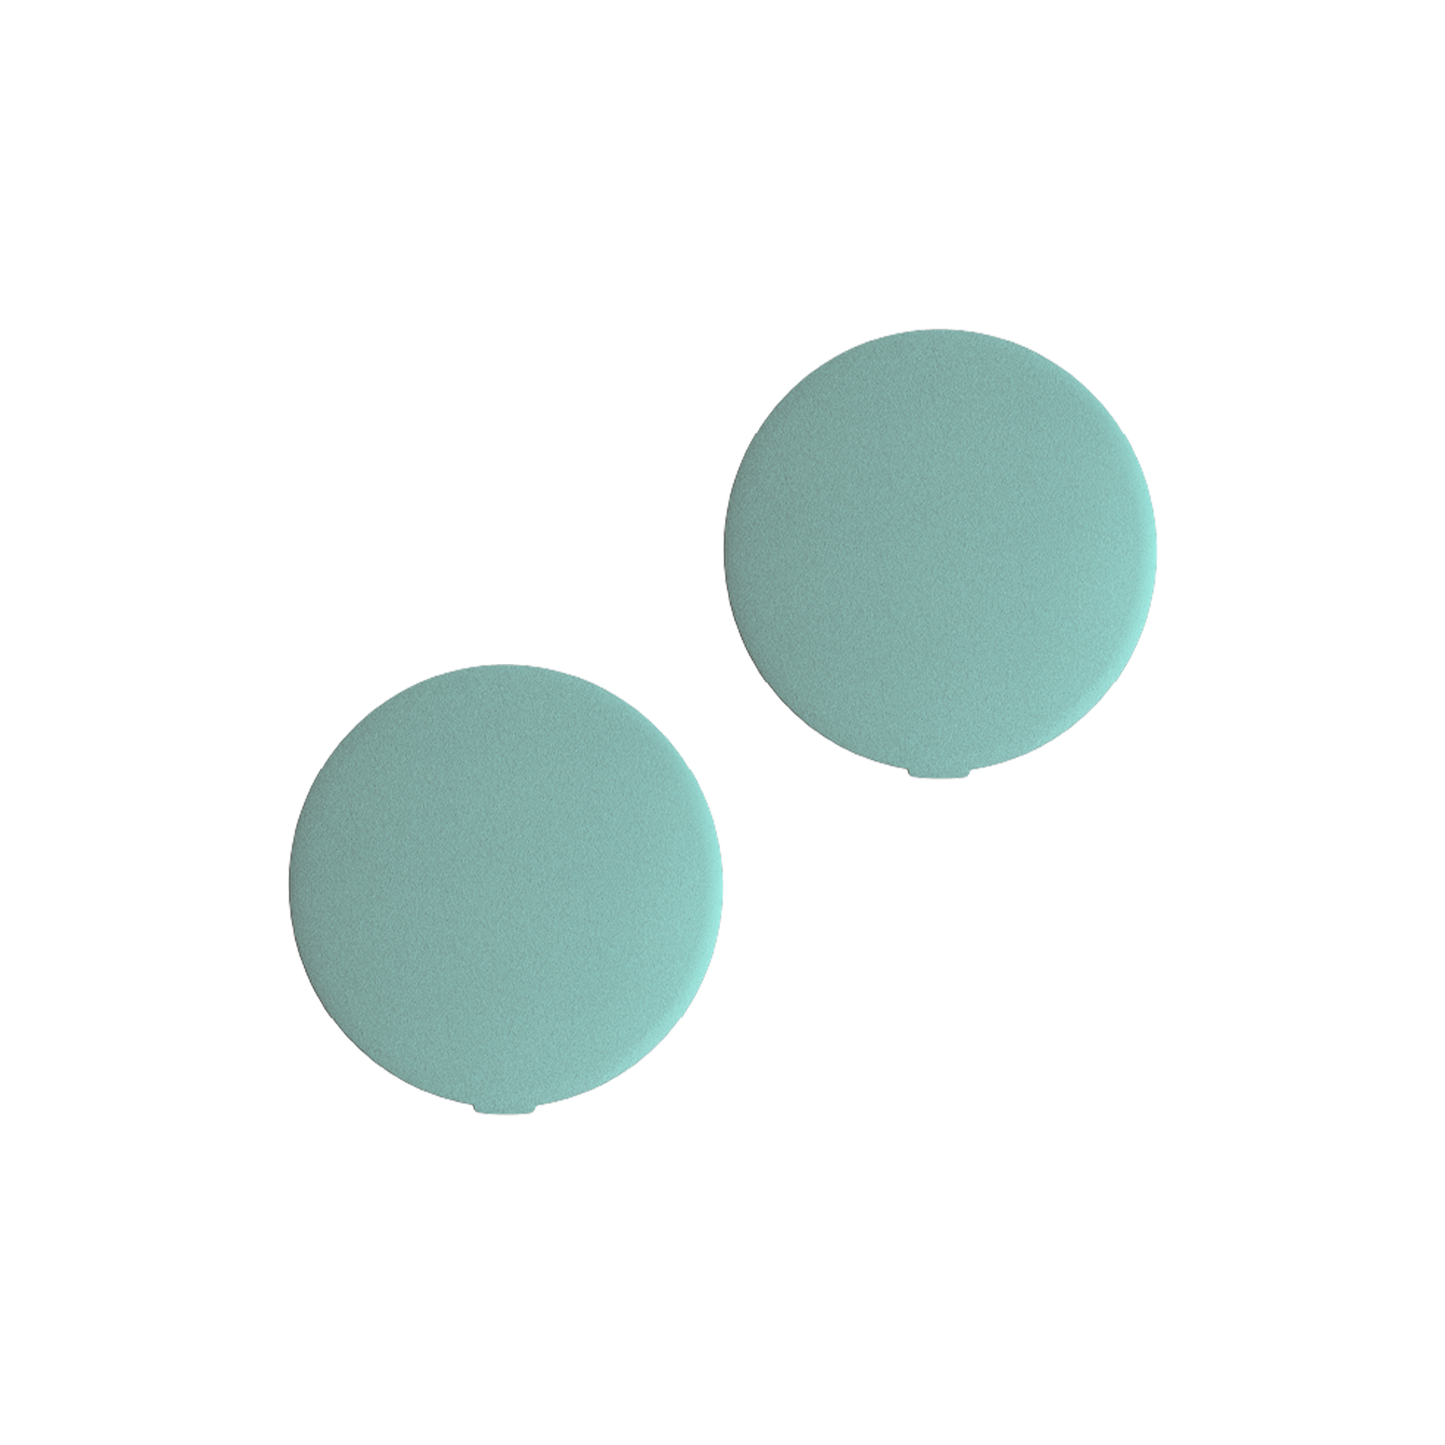 AT-4003-ETEAL?2 polish Aluminum Oxide Exfoliator Replacements in teal